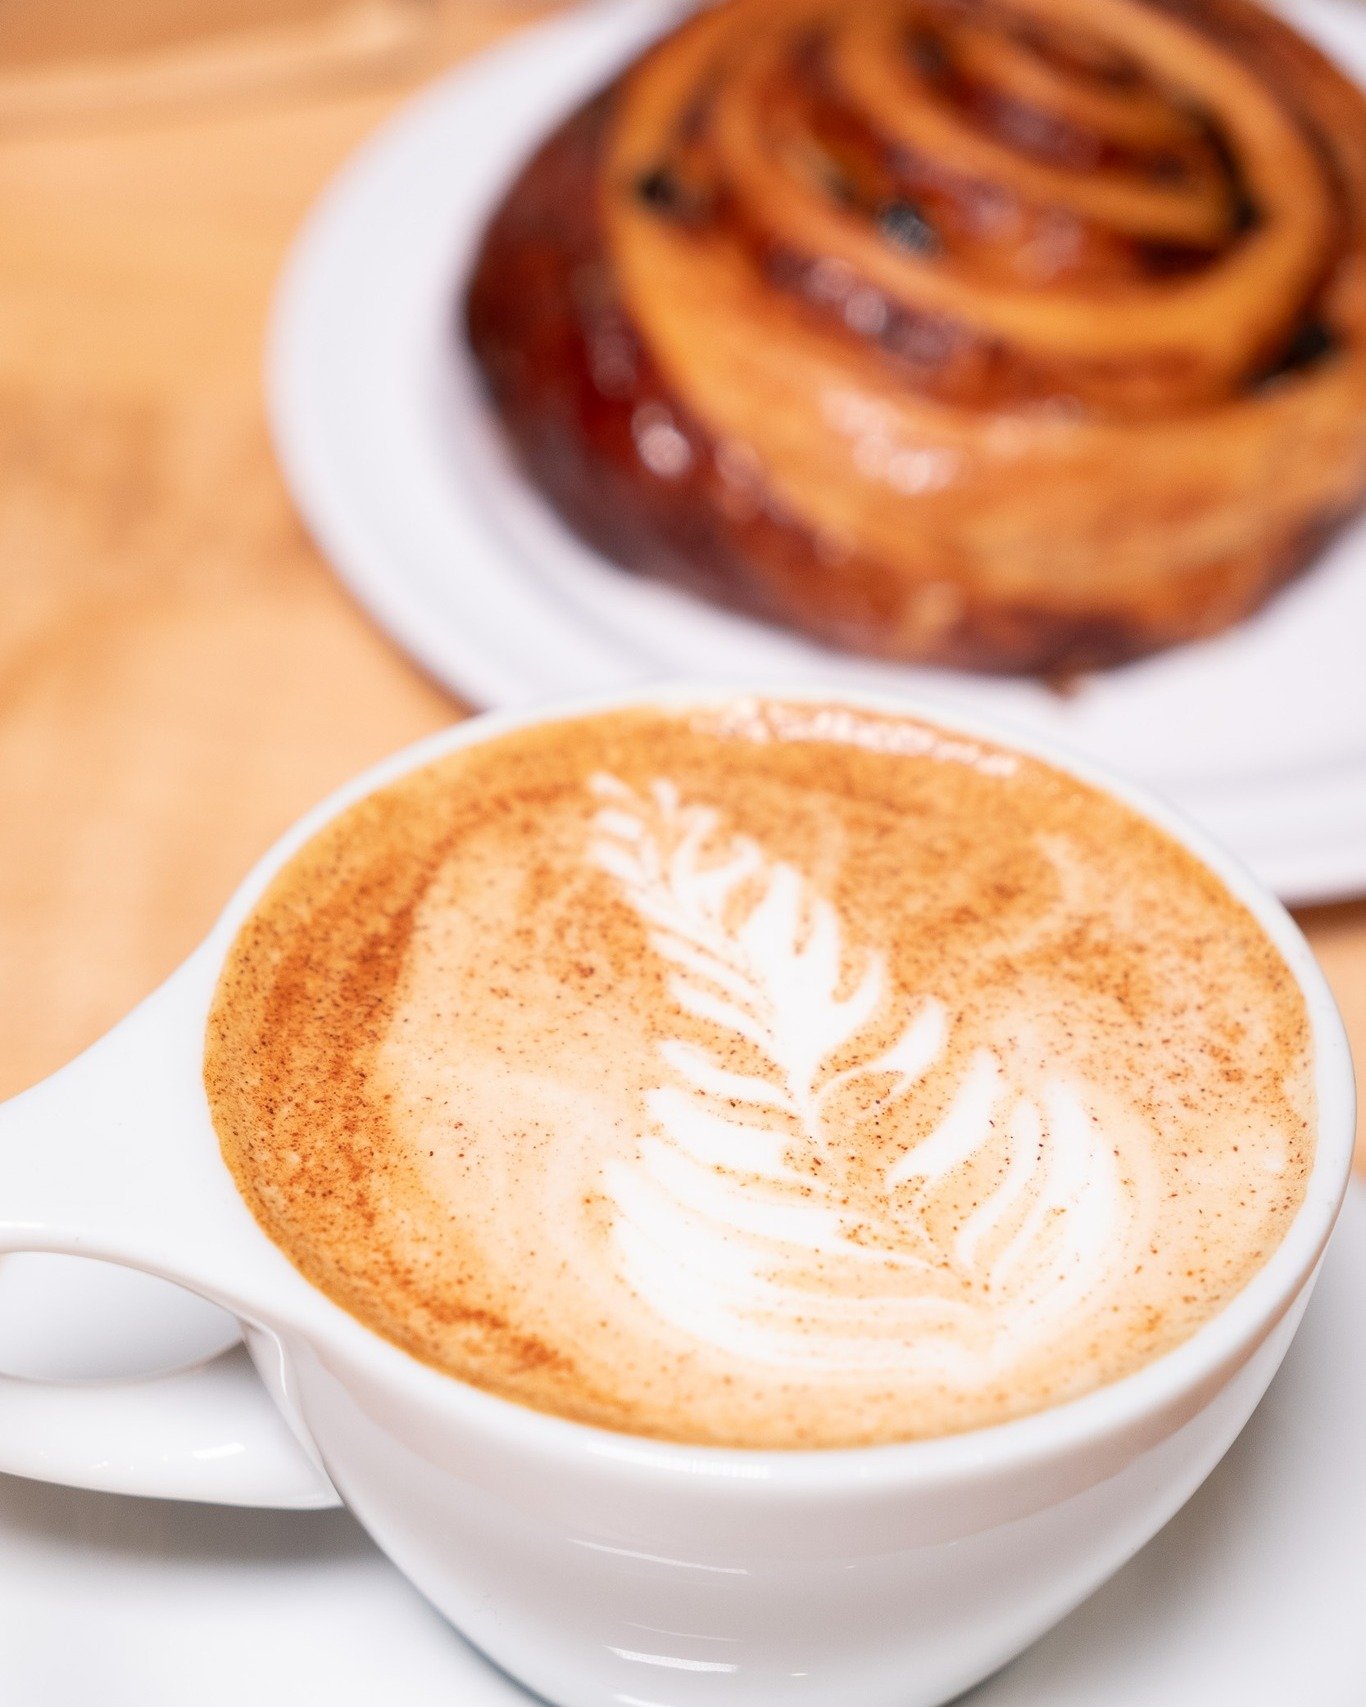 Savor the perfect pairing: Our Saw Mill Espresso paired with a delectable cinnamon roll from CRUST! ☕️✨ Experience the rich and flavorful profile, with a touch of acidity while maintaining that classic body of our espresso, complemented by the sweet 